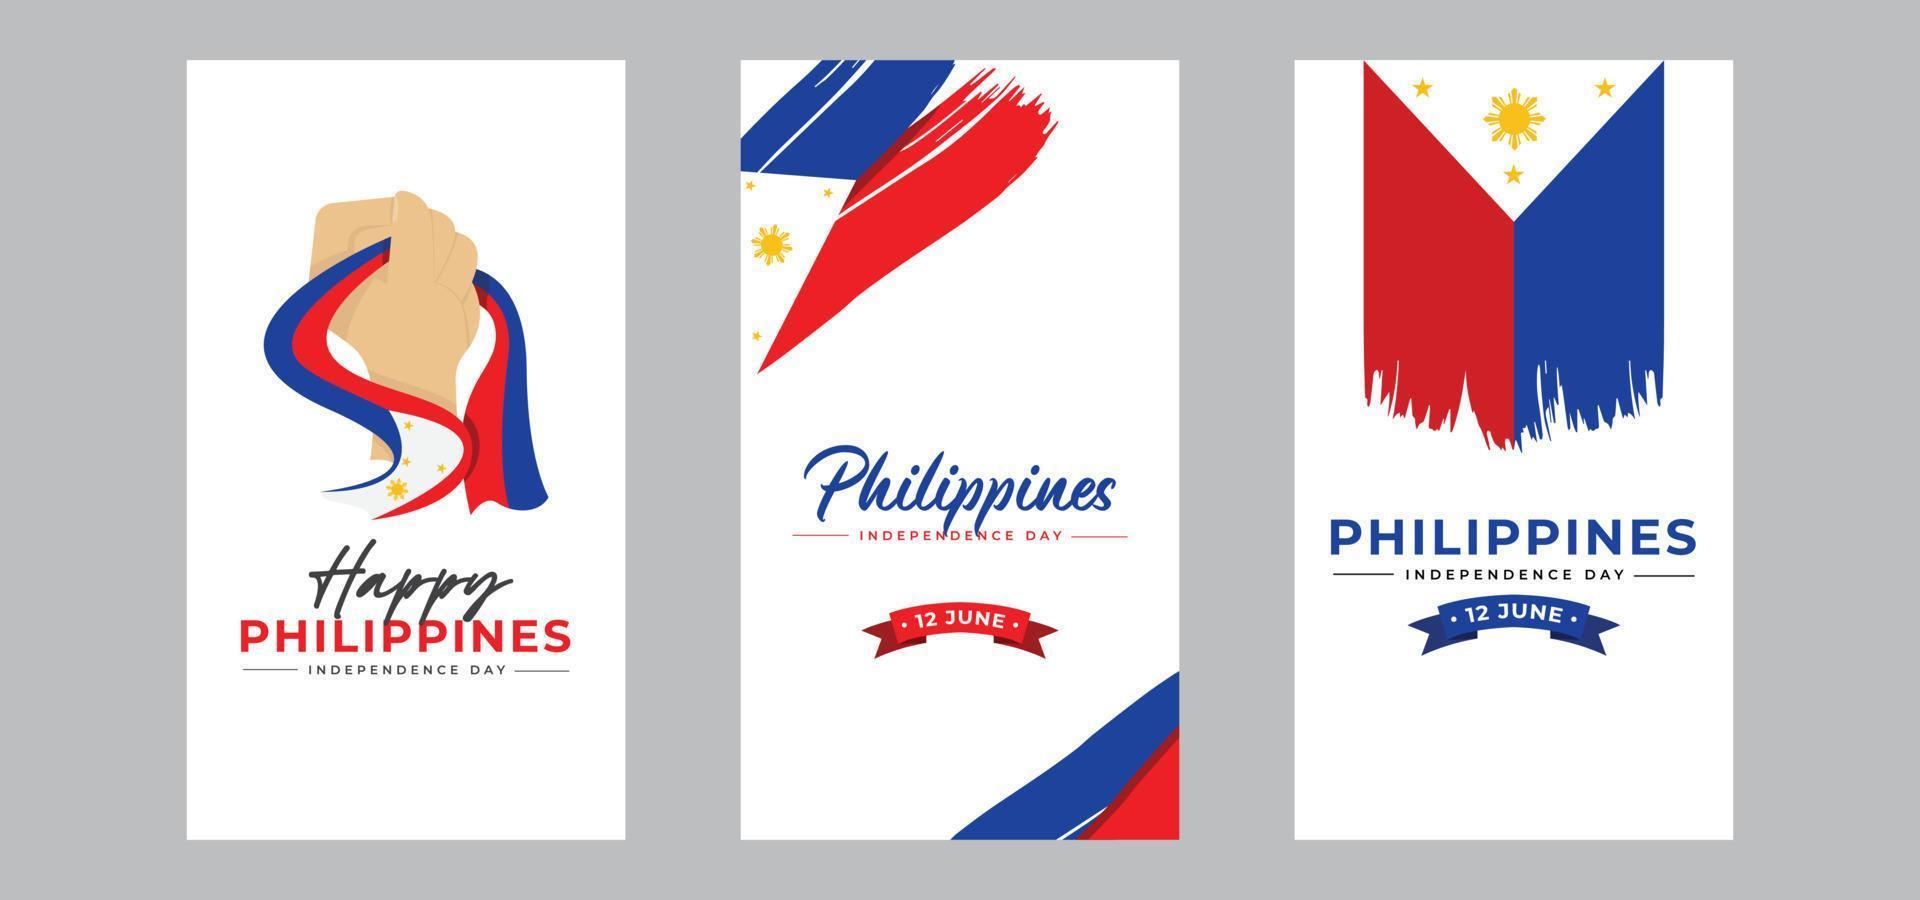 Philippines independence day banner design template vector